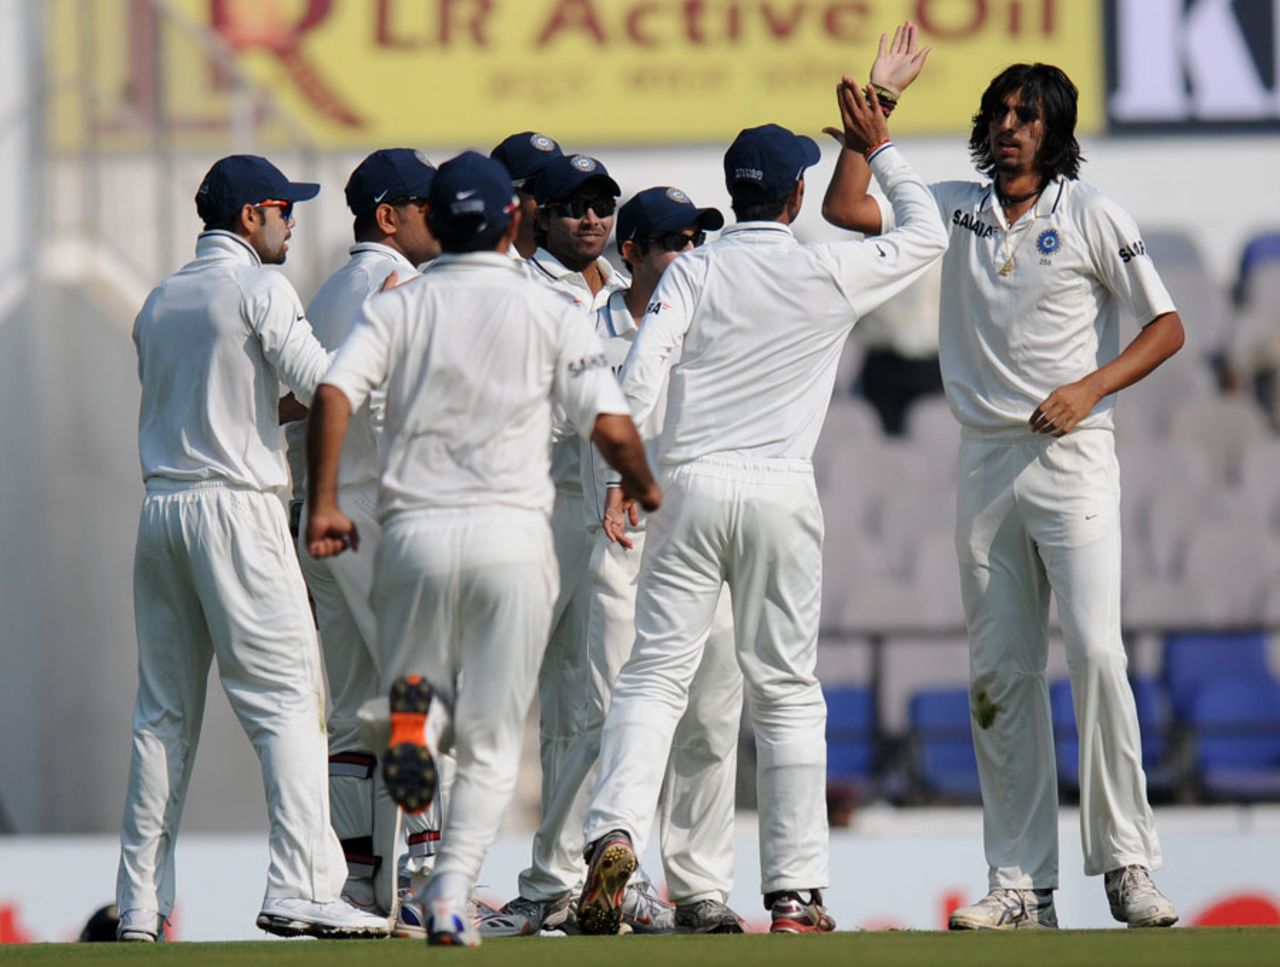 Ishant Sharma made the first breakthrough for India, India v England, 4th Test, Nagpur, 1st day, December 13, 2012